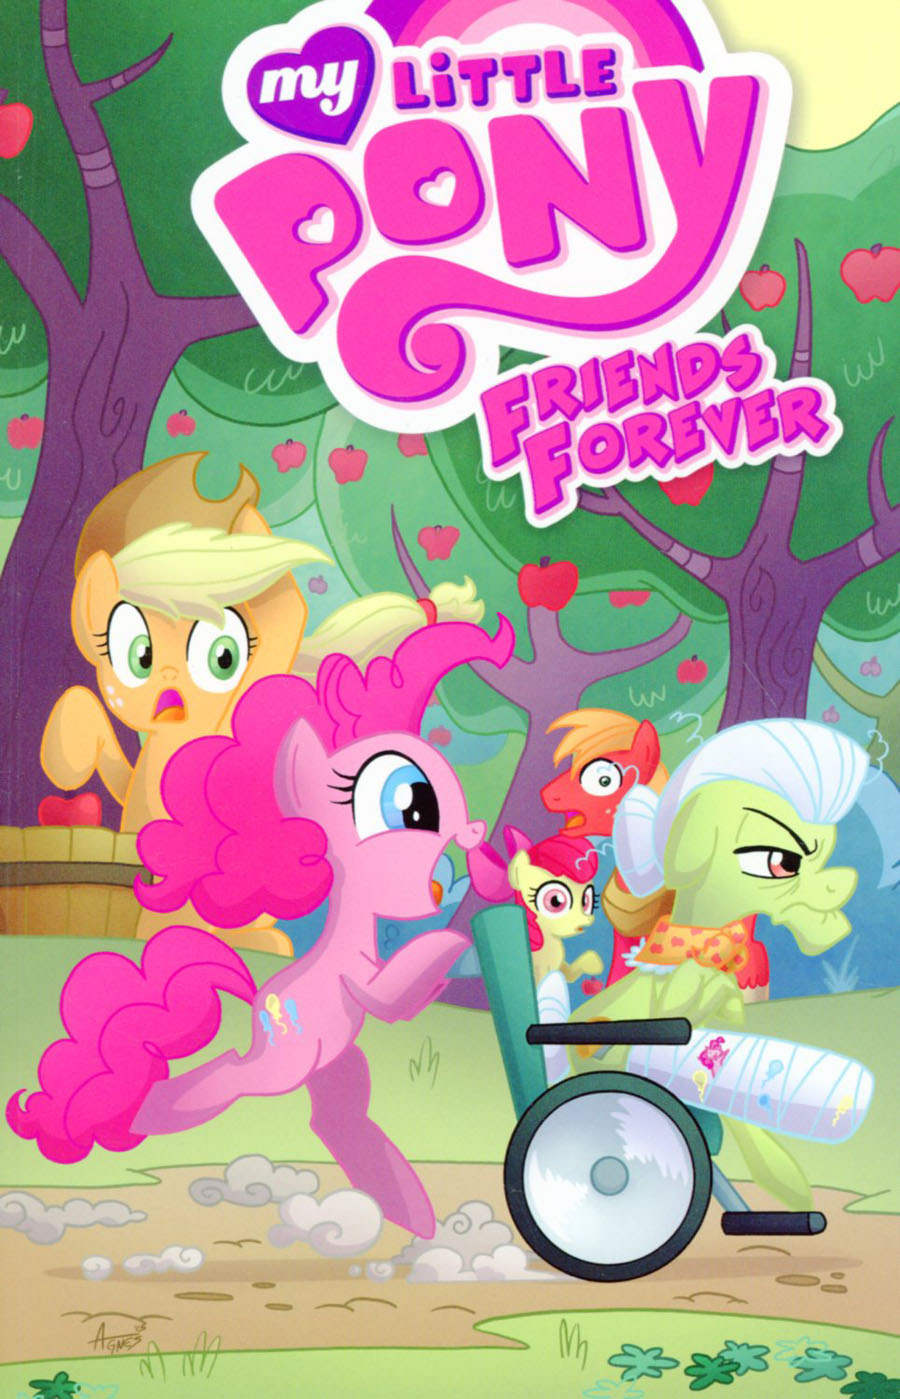 My Little Pony Friends Forever Vol 7 TP